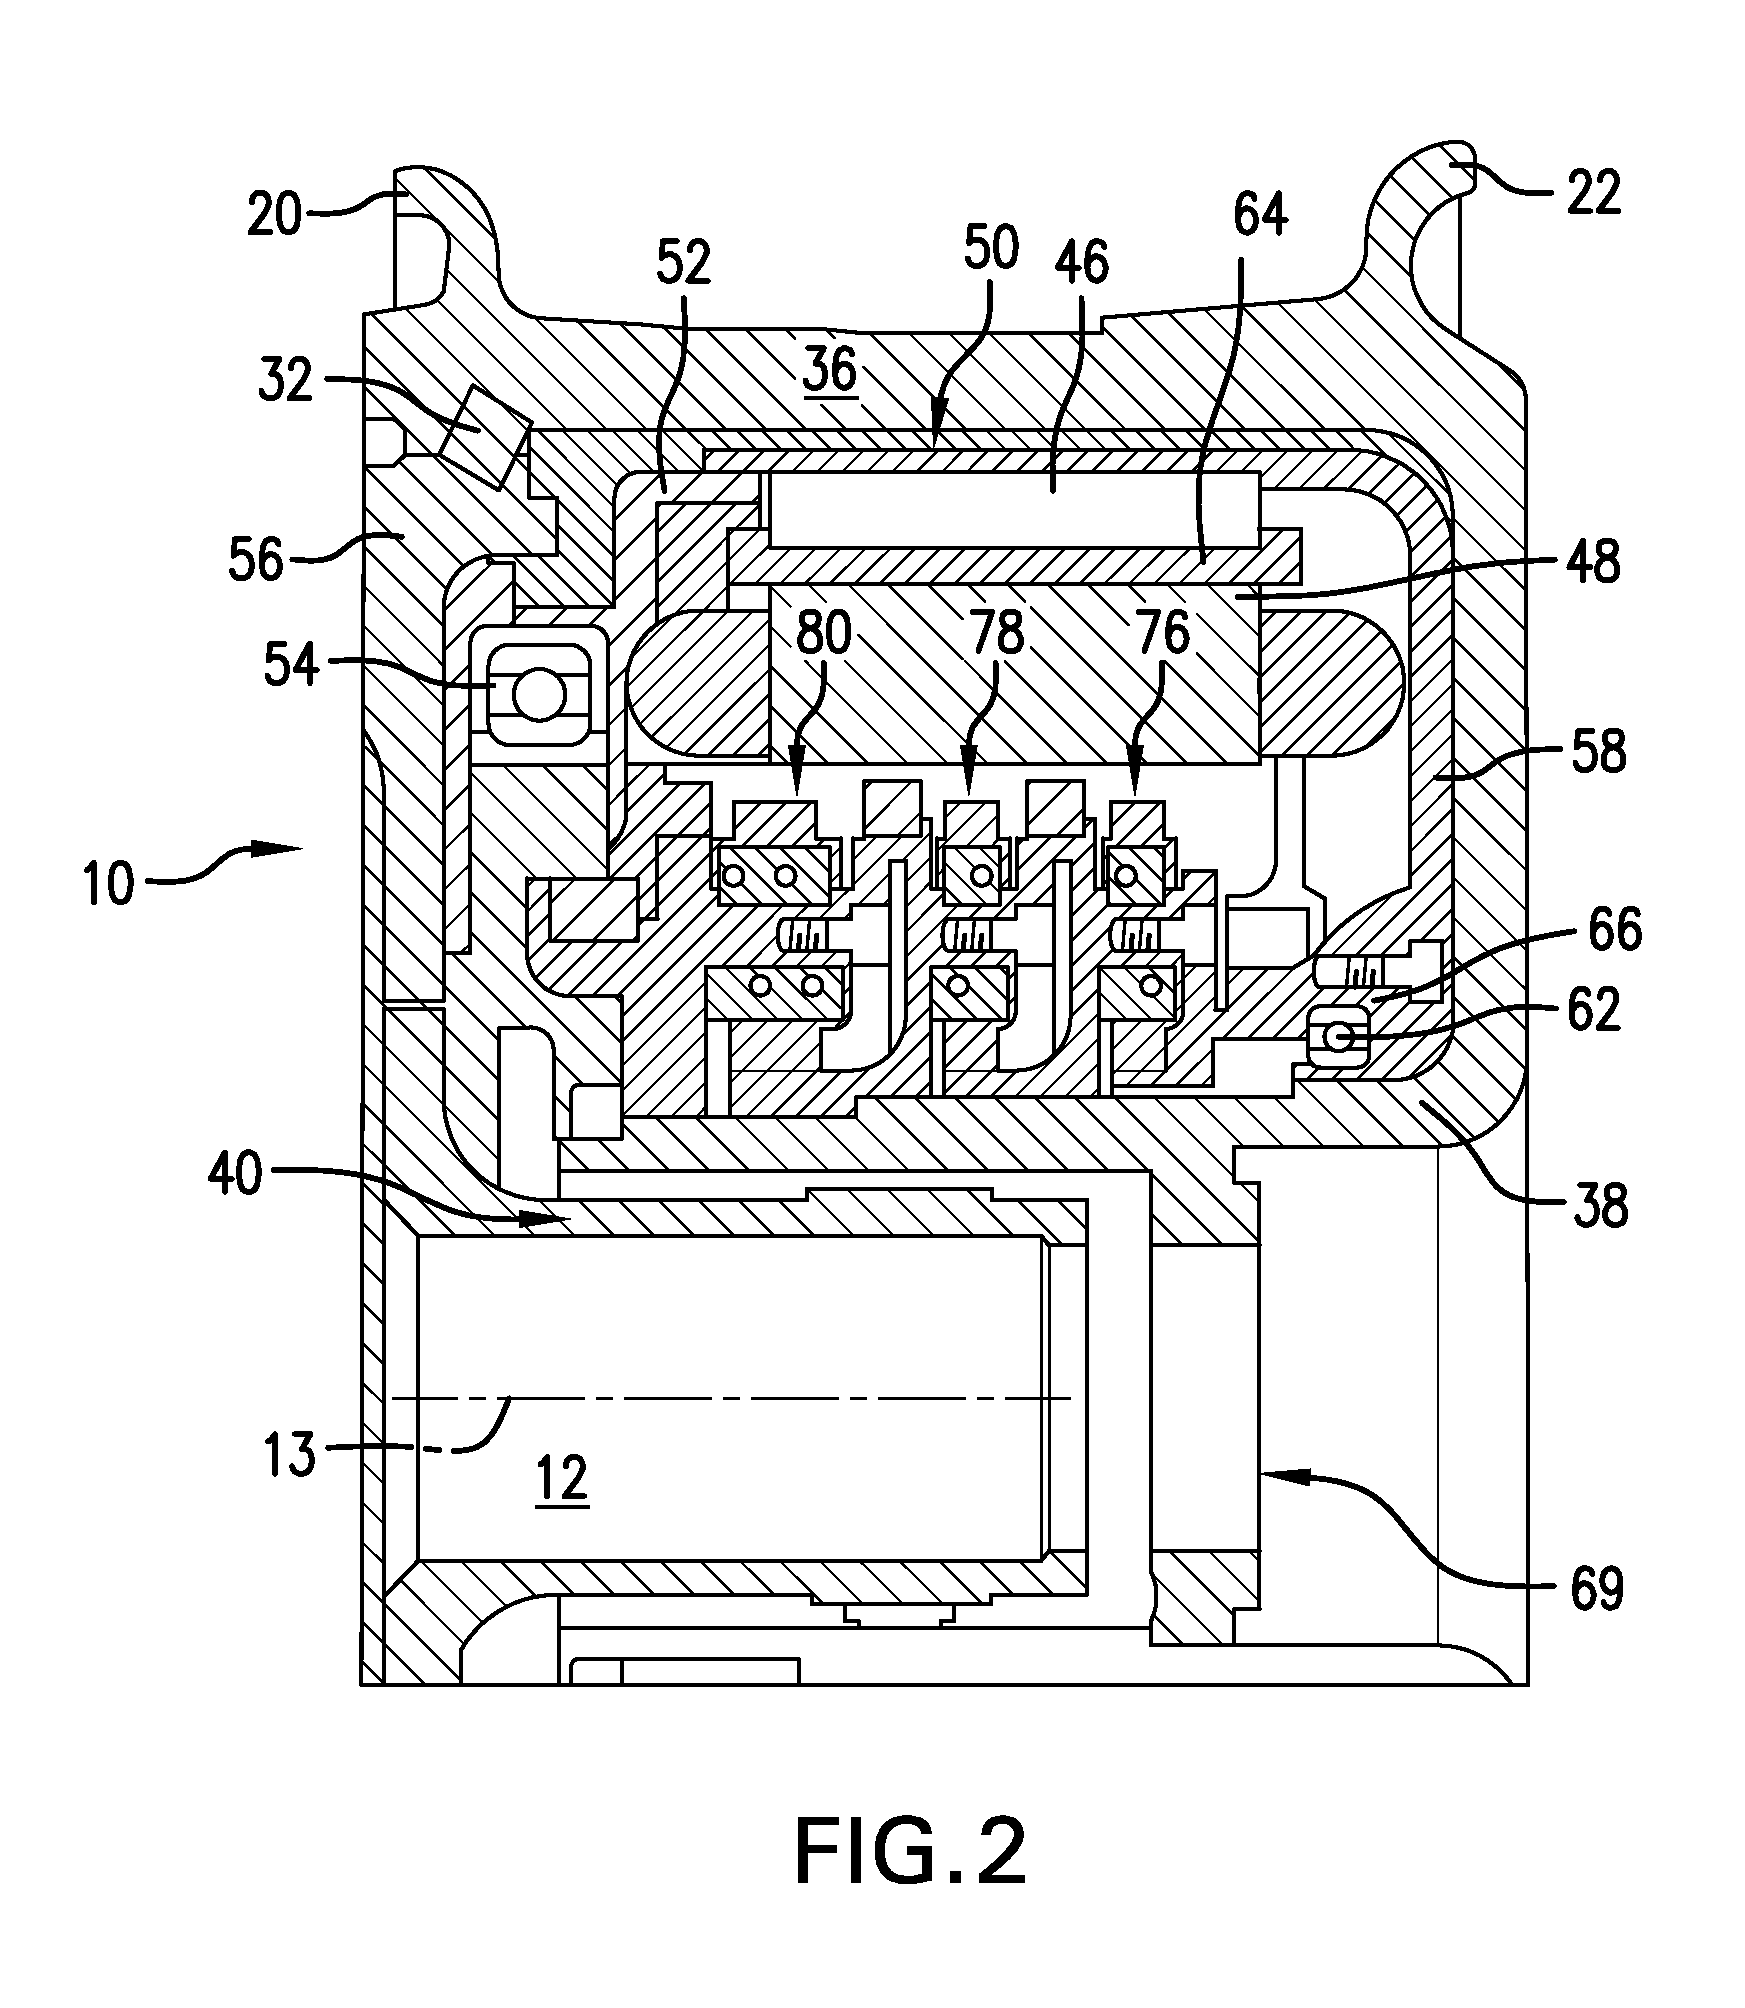 Motor and gearing system for aircraft wheel